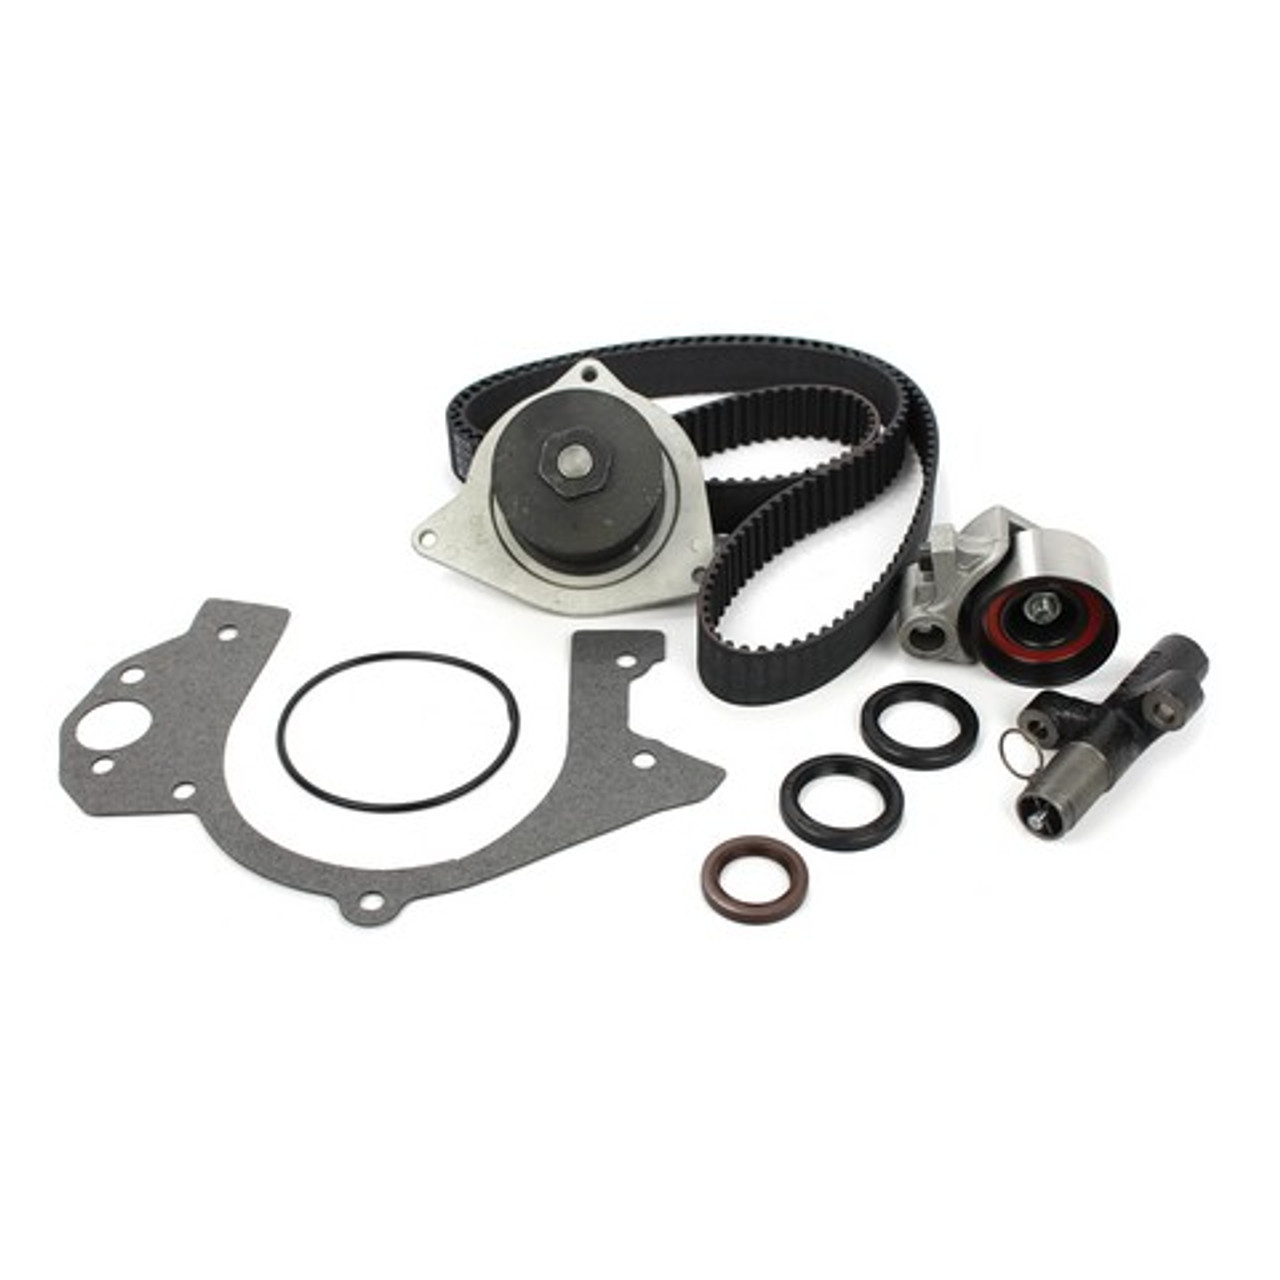 1997 Eagle Vision 3.5L Timing Belt Kit with Water Pump TBK1145AWP.E14